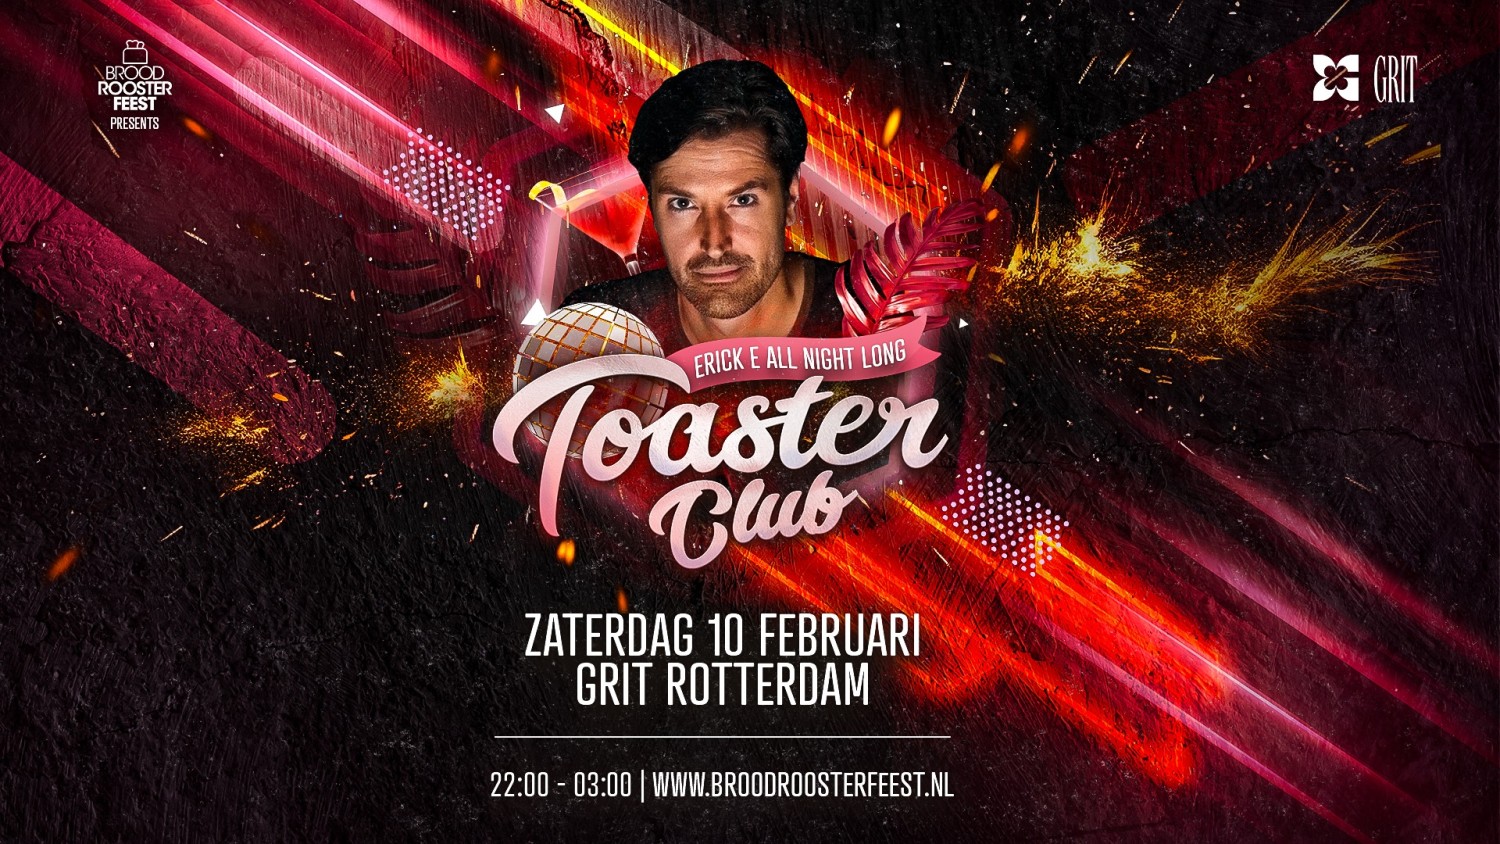 Party nieuws: Erick E All Night Long tijdens Toaster Club